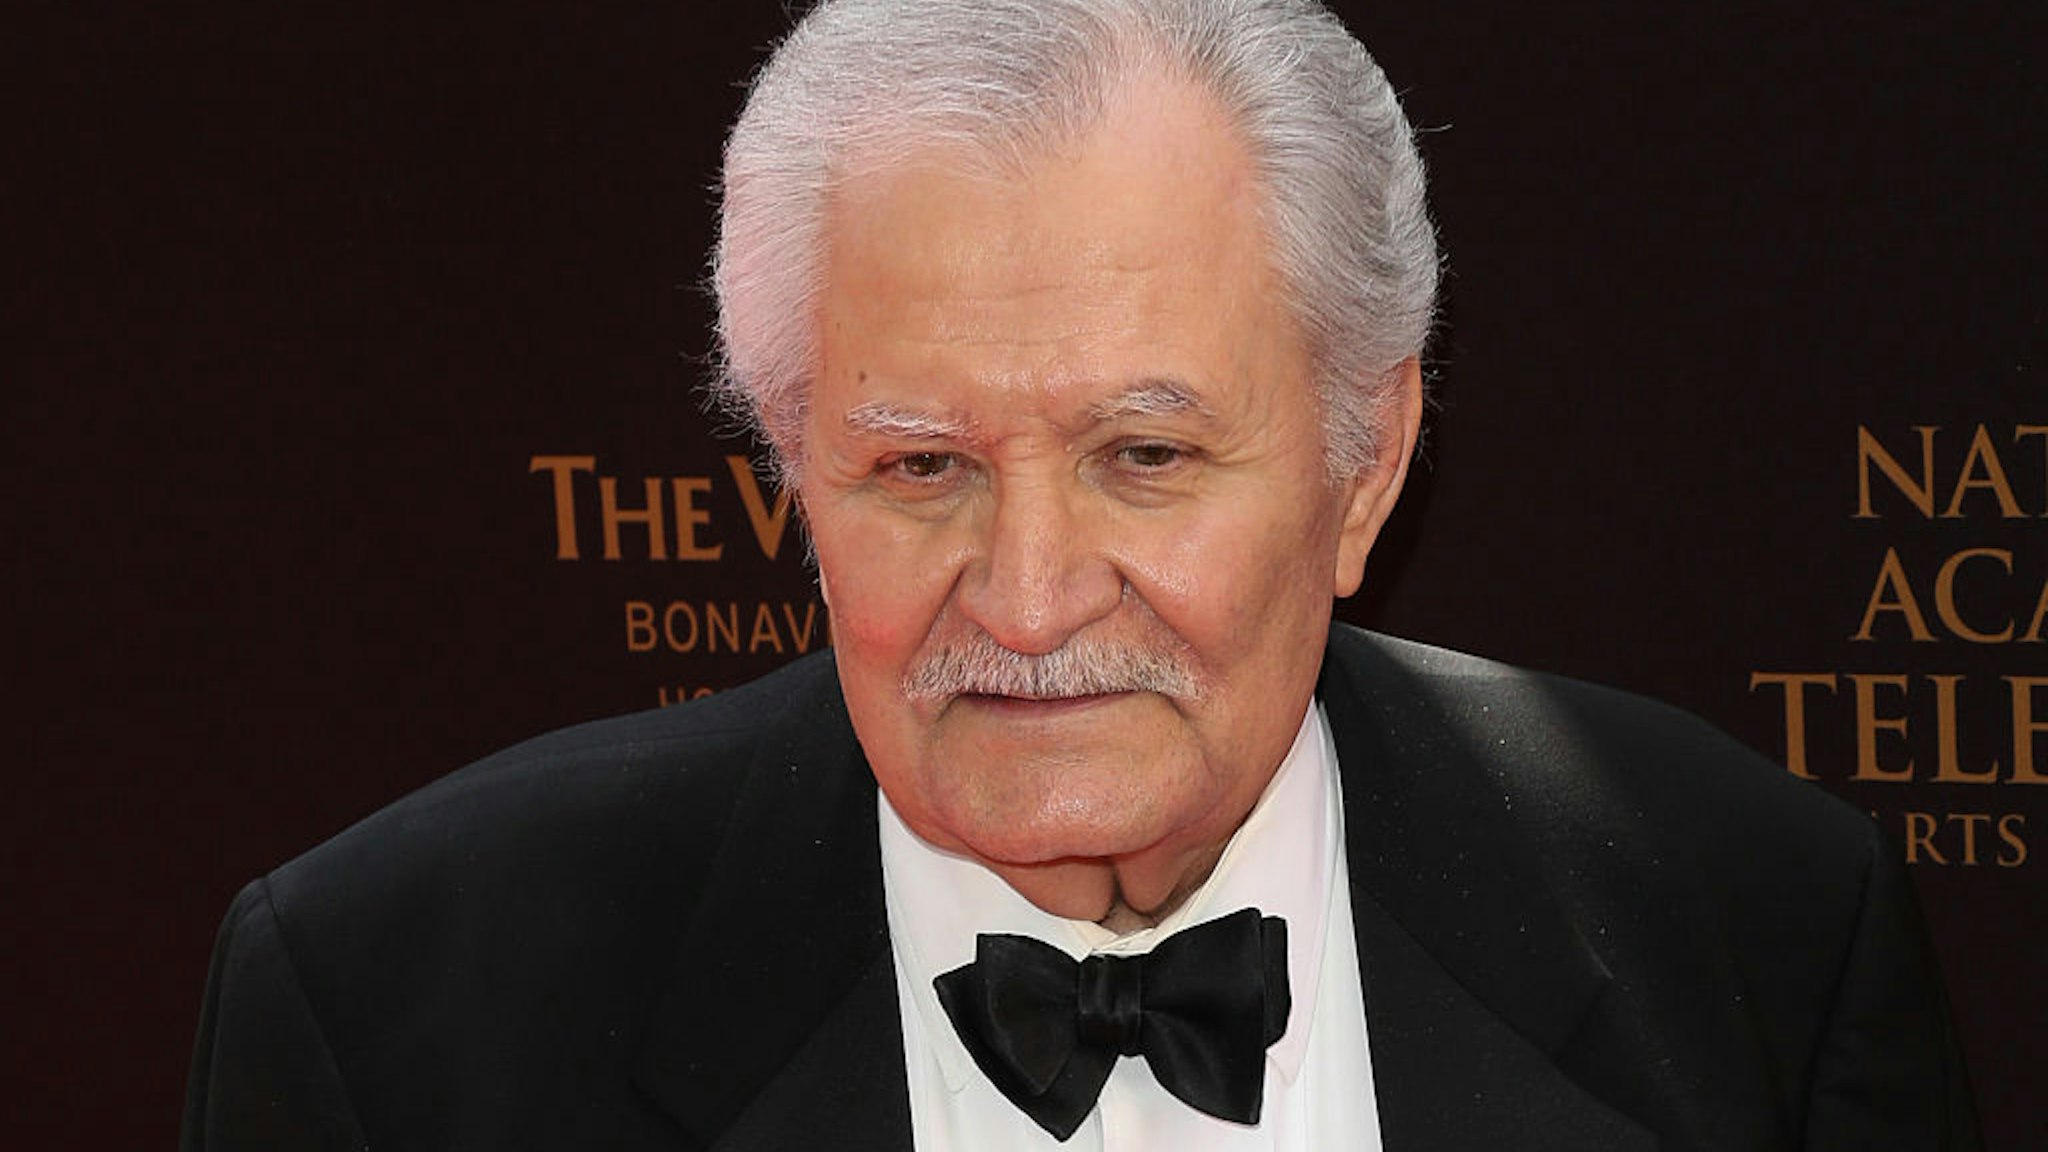 LOS ANGELES, CA - MAY 01: Actor John Aniston attends the 2016 Daytime Emmy Awards at The Westin Bonaventure Hotel on May 1, 2016 in Los Angeles, California. (Photo by Paul Archuleta/FilmMagic)